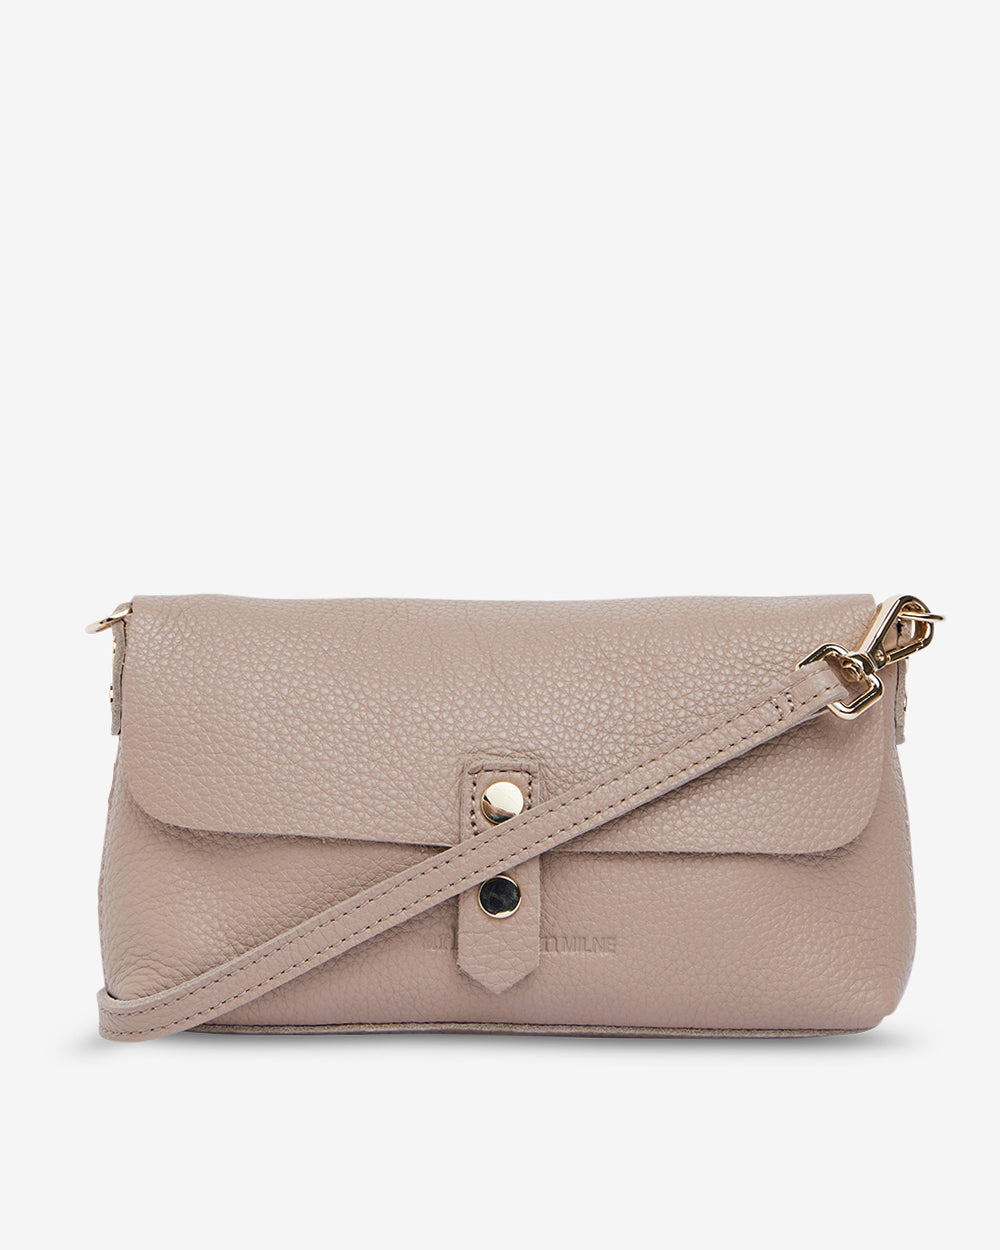 Paige Wallet - Fawn